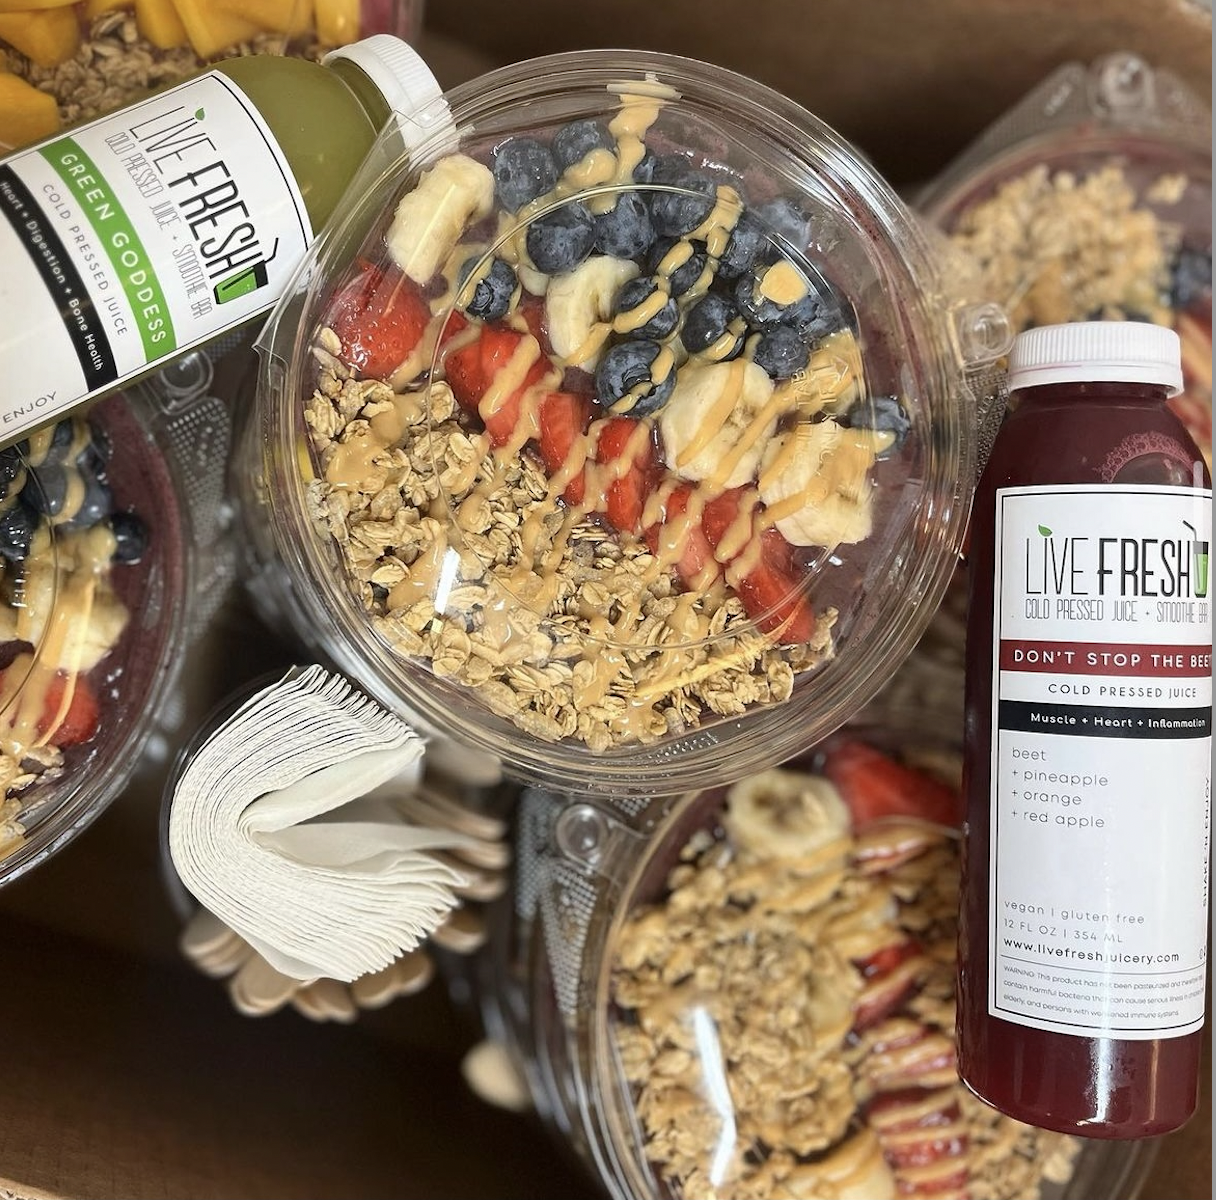 An Açaí Bowl at Live Fresh Juicery in a plastic container with bottles of juice next to it.